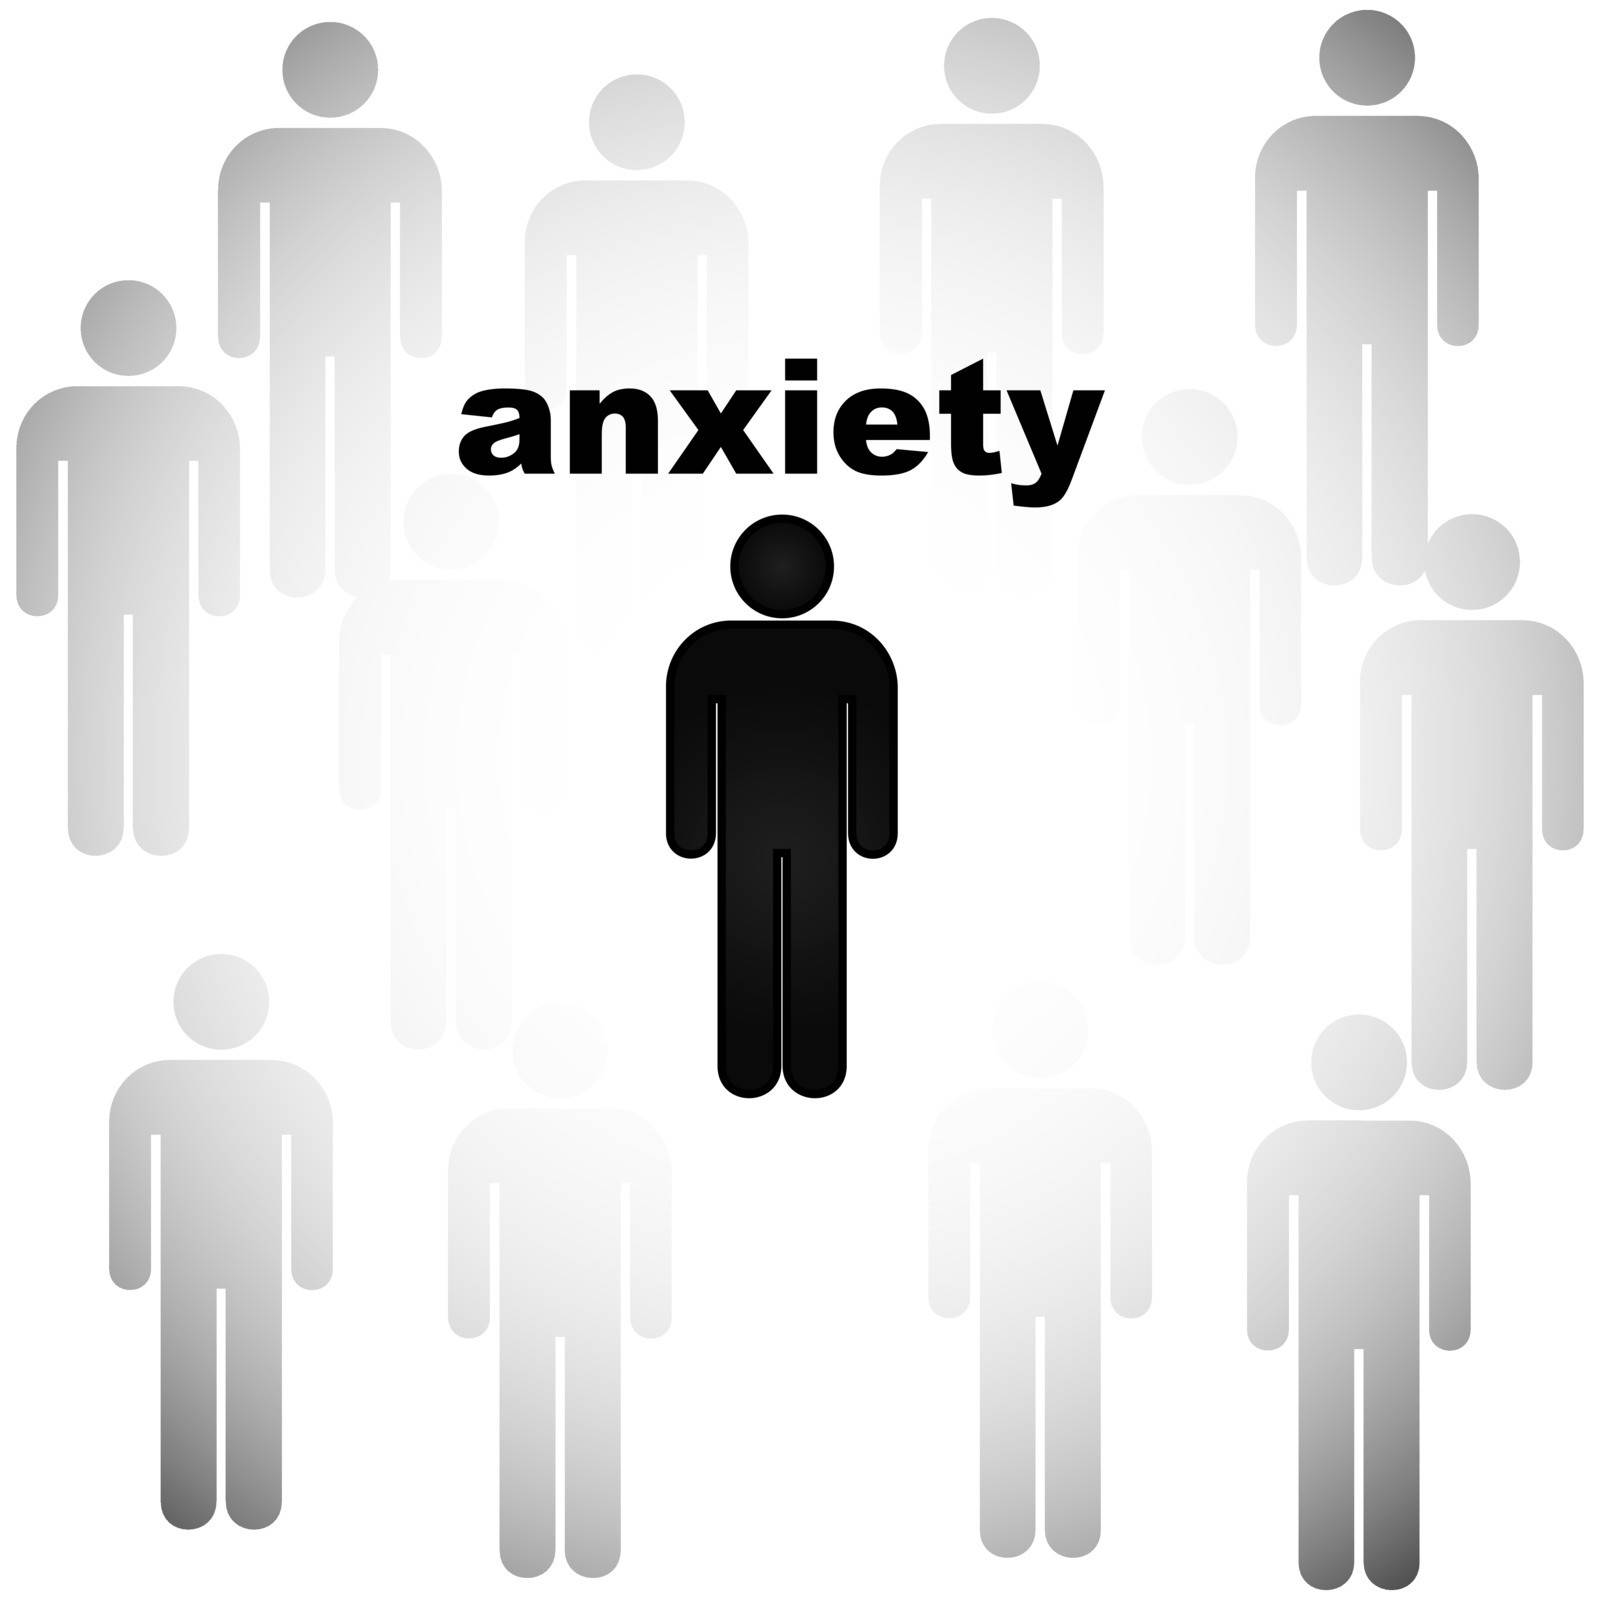 Concept illustration showing a person being surrounded by other people and being anxious about it